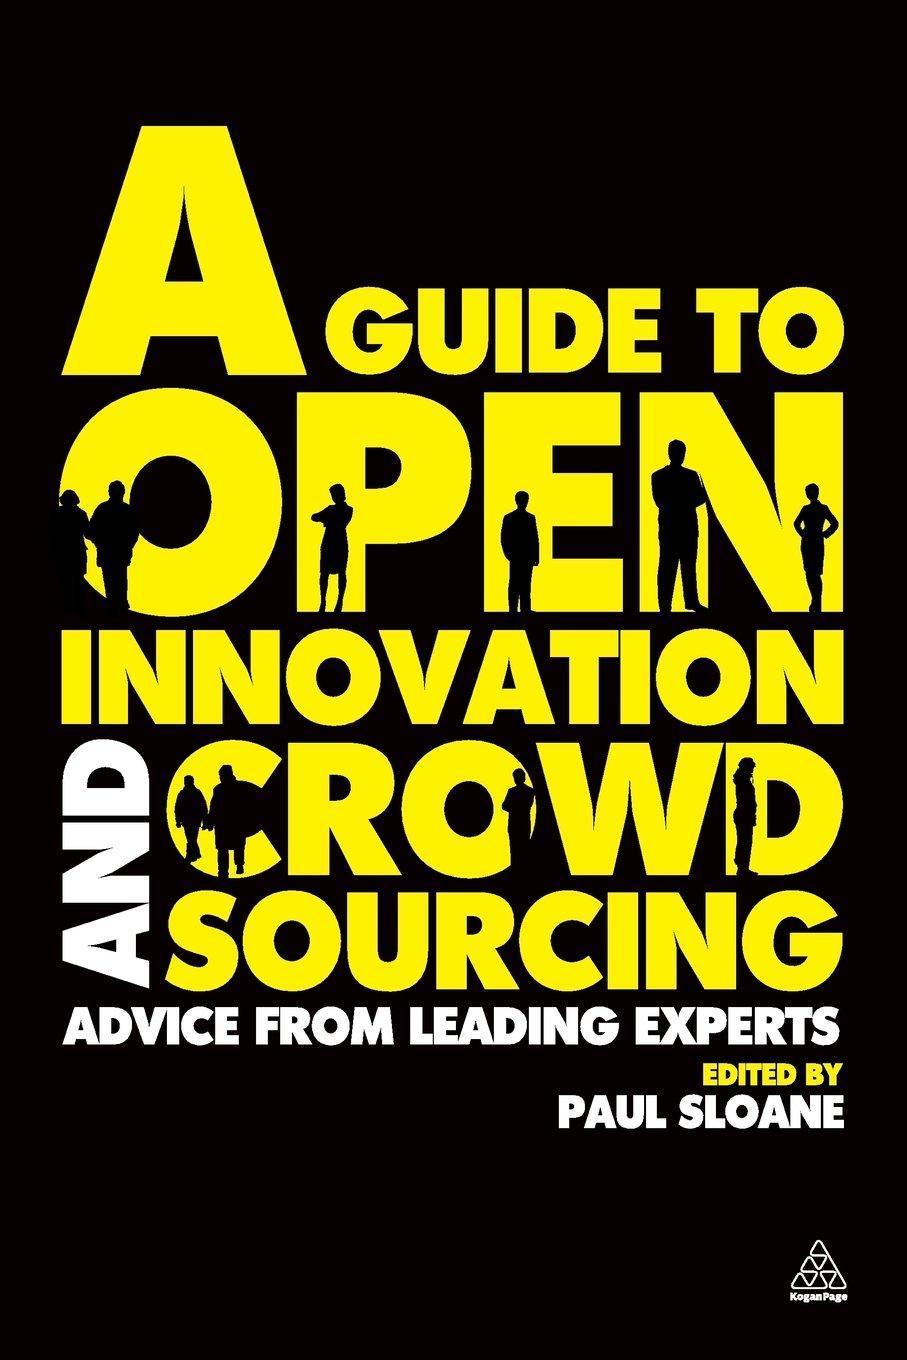 A Guide to Open Innovation and Crowdsourcing: Advice from Leading Experts in the Field